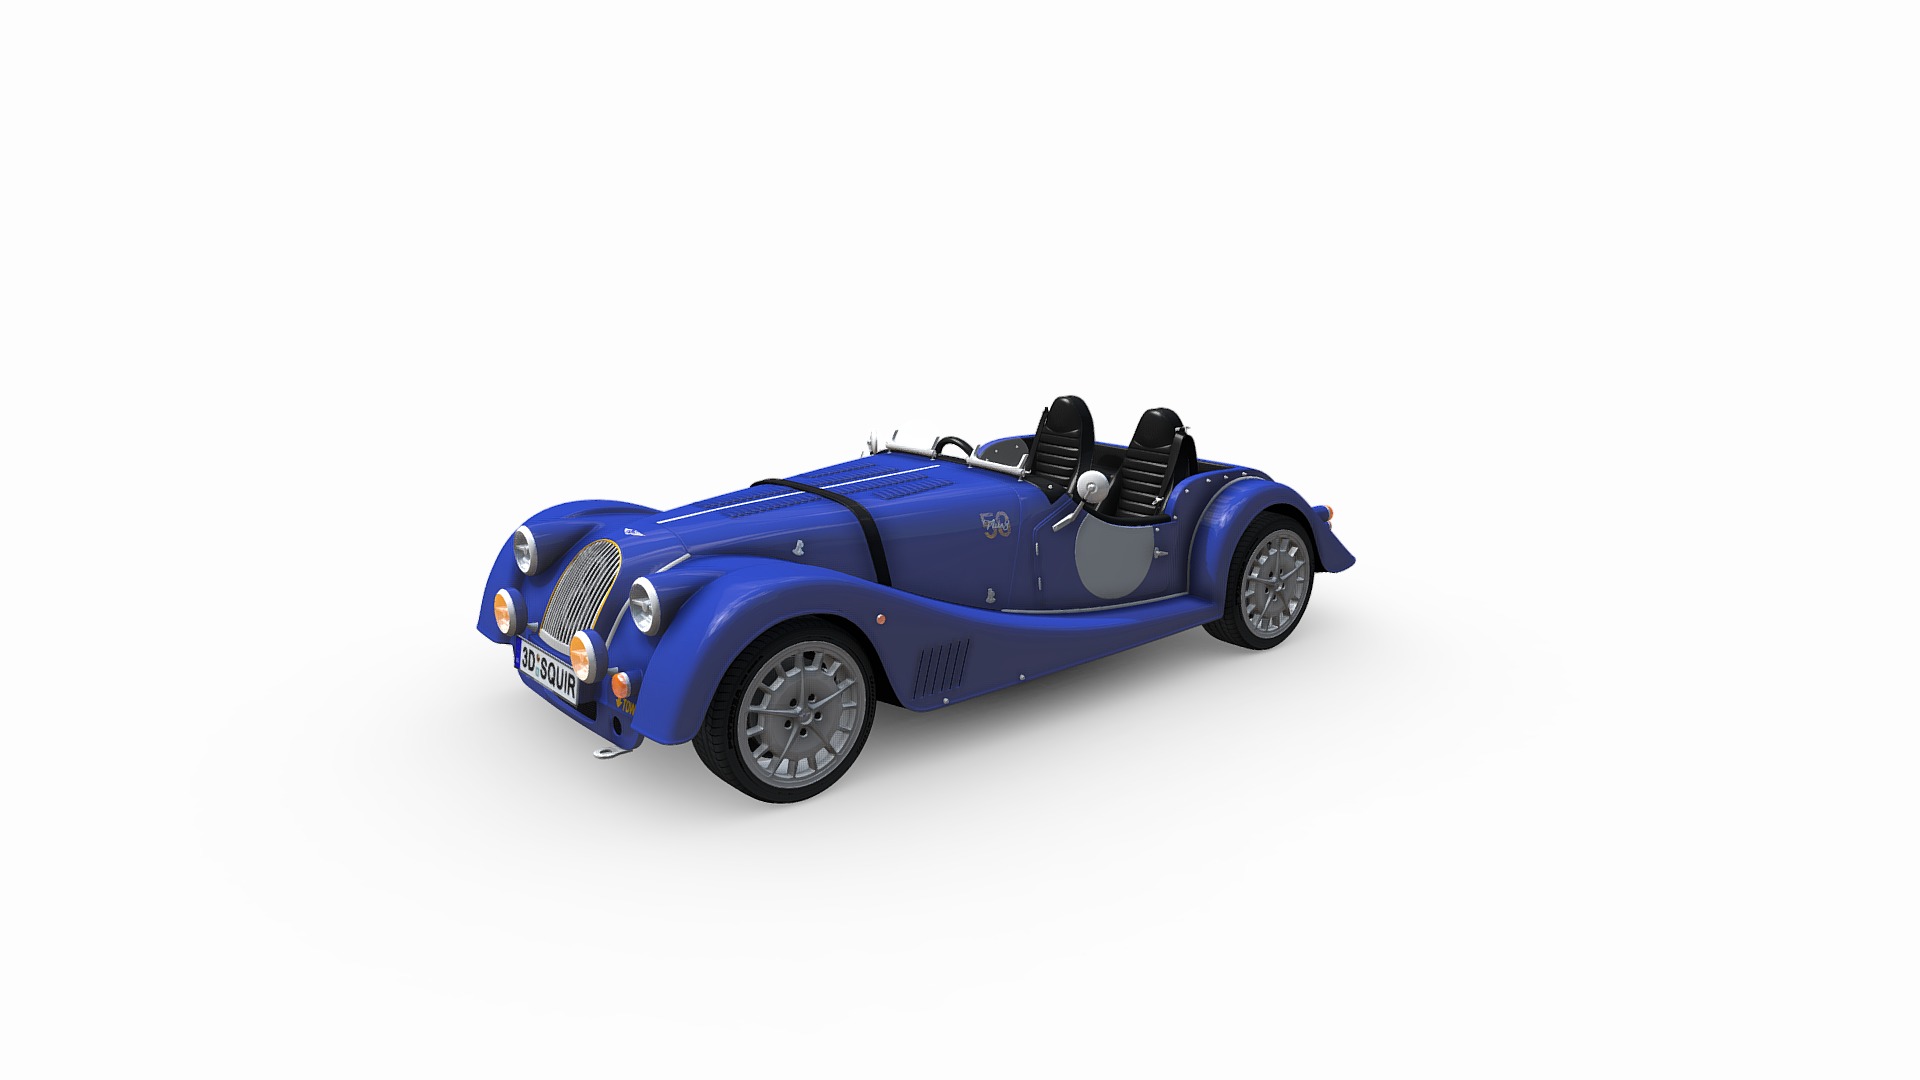 3D model Morgan Plus 8 50th Anniversary 2018 - This is a 3D model of the Morgan Plus 8 50th Anniversary 2018. The 3D model is about a blue toy car.